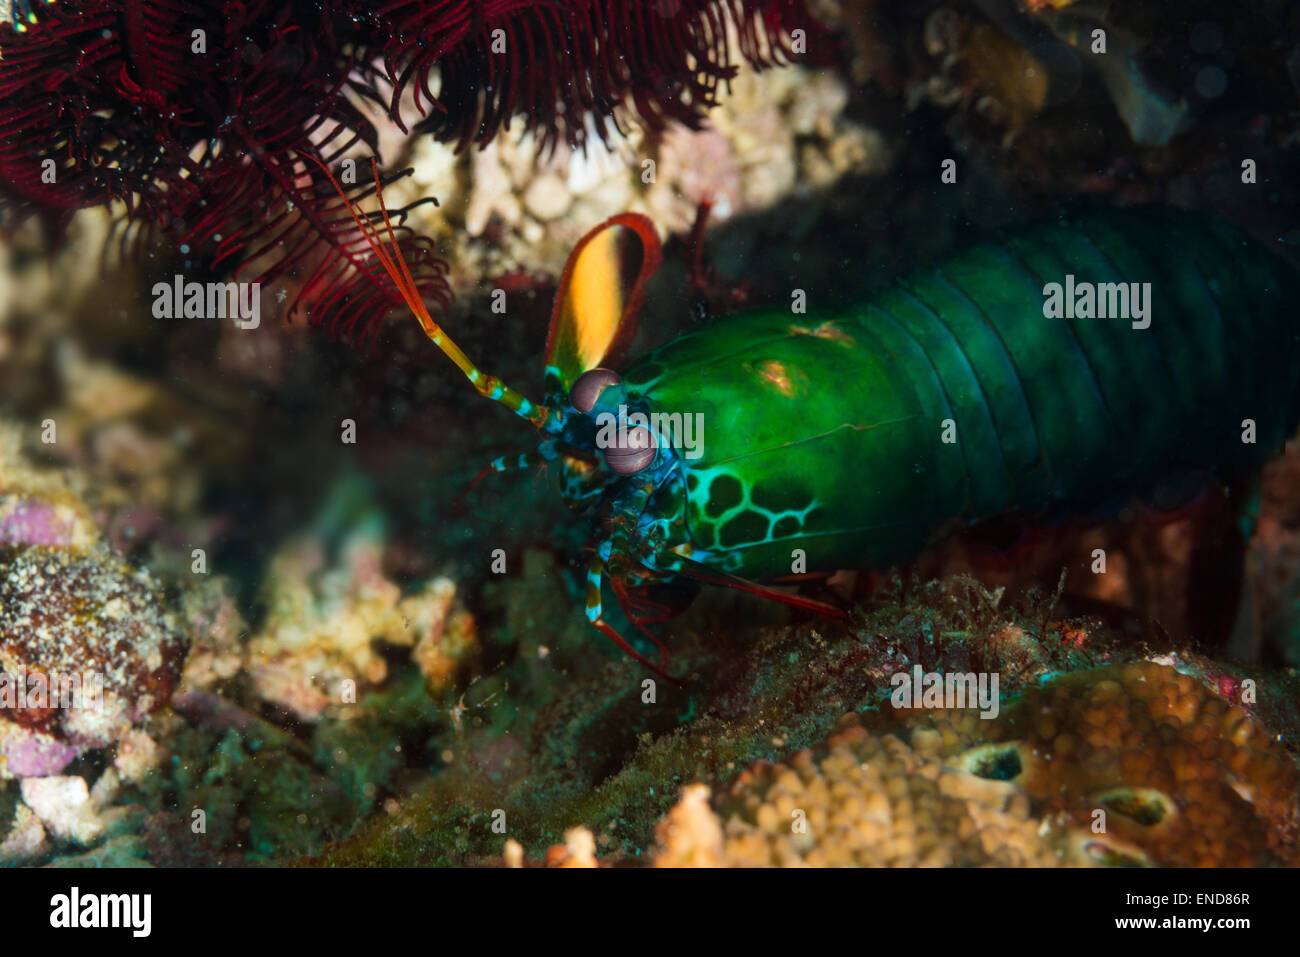 Peacock mantis shrimp rearing up from the sea floor in defense Stock Photo